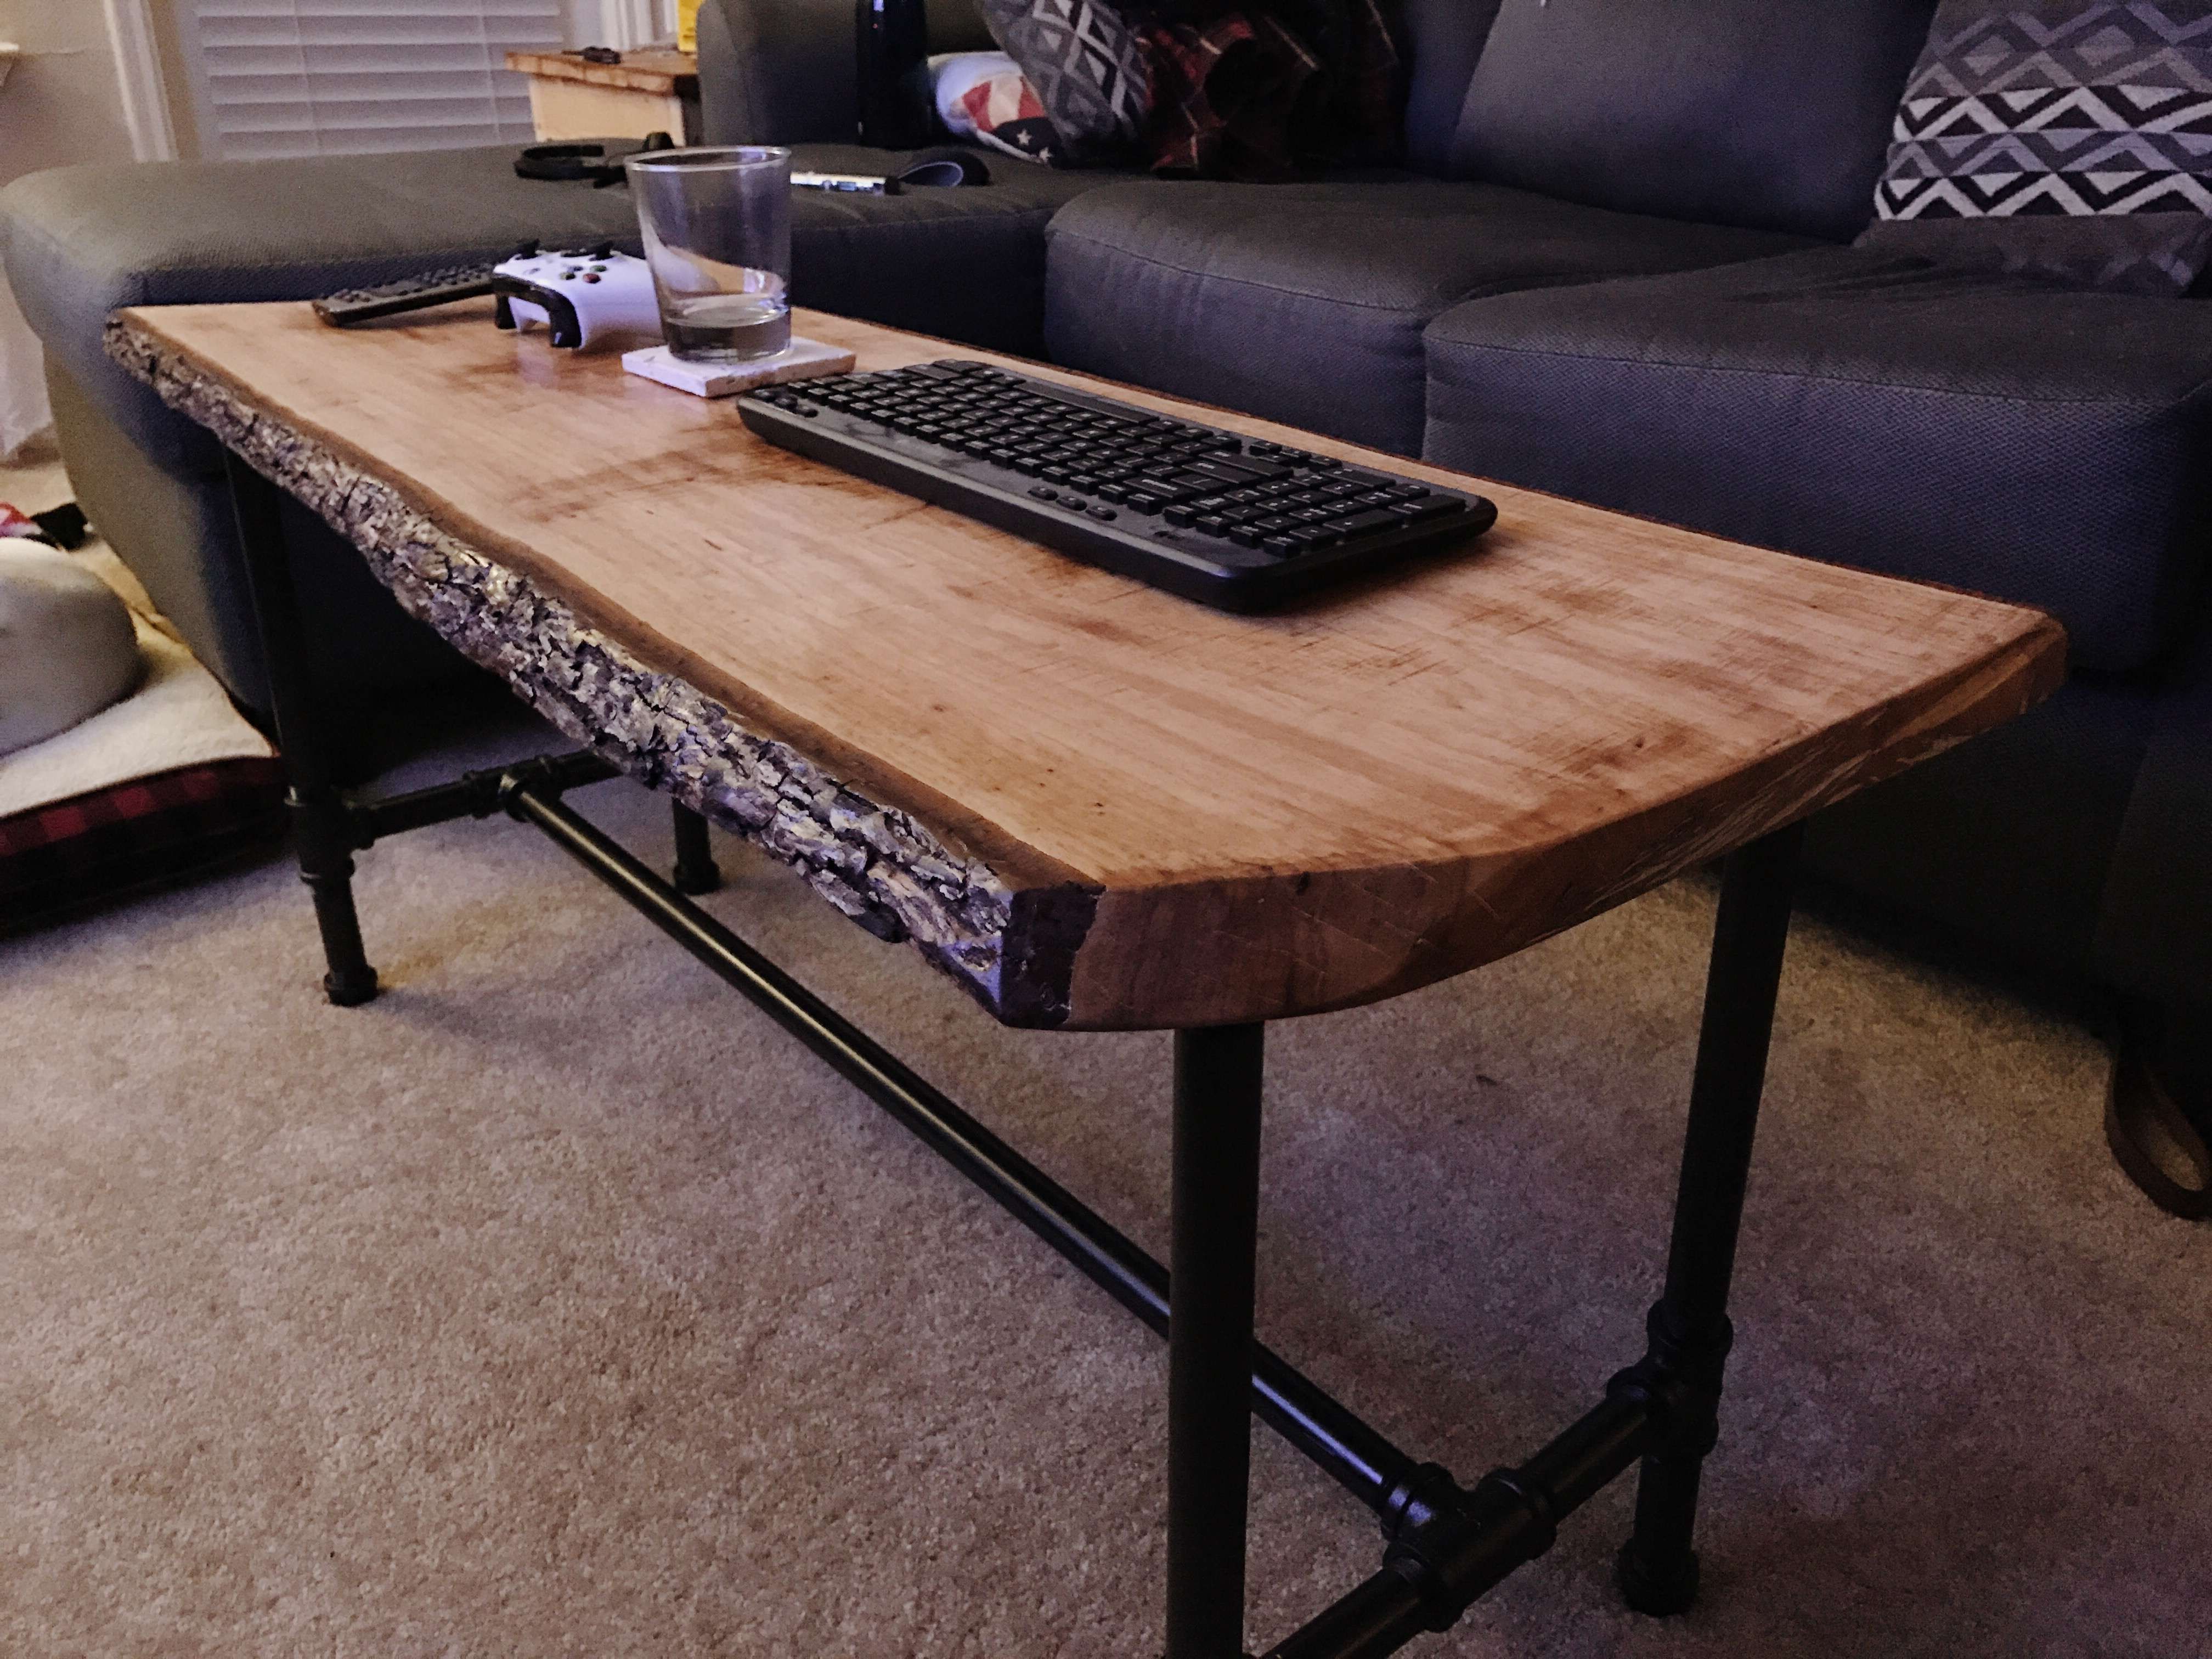 Live Edge Pecan Coffee Table & Pipe Legs – Album On Imgur Within Current Short Legs Coffee Tables (View 12 of 20)